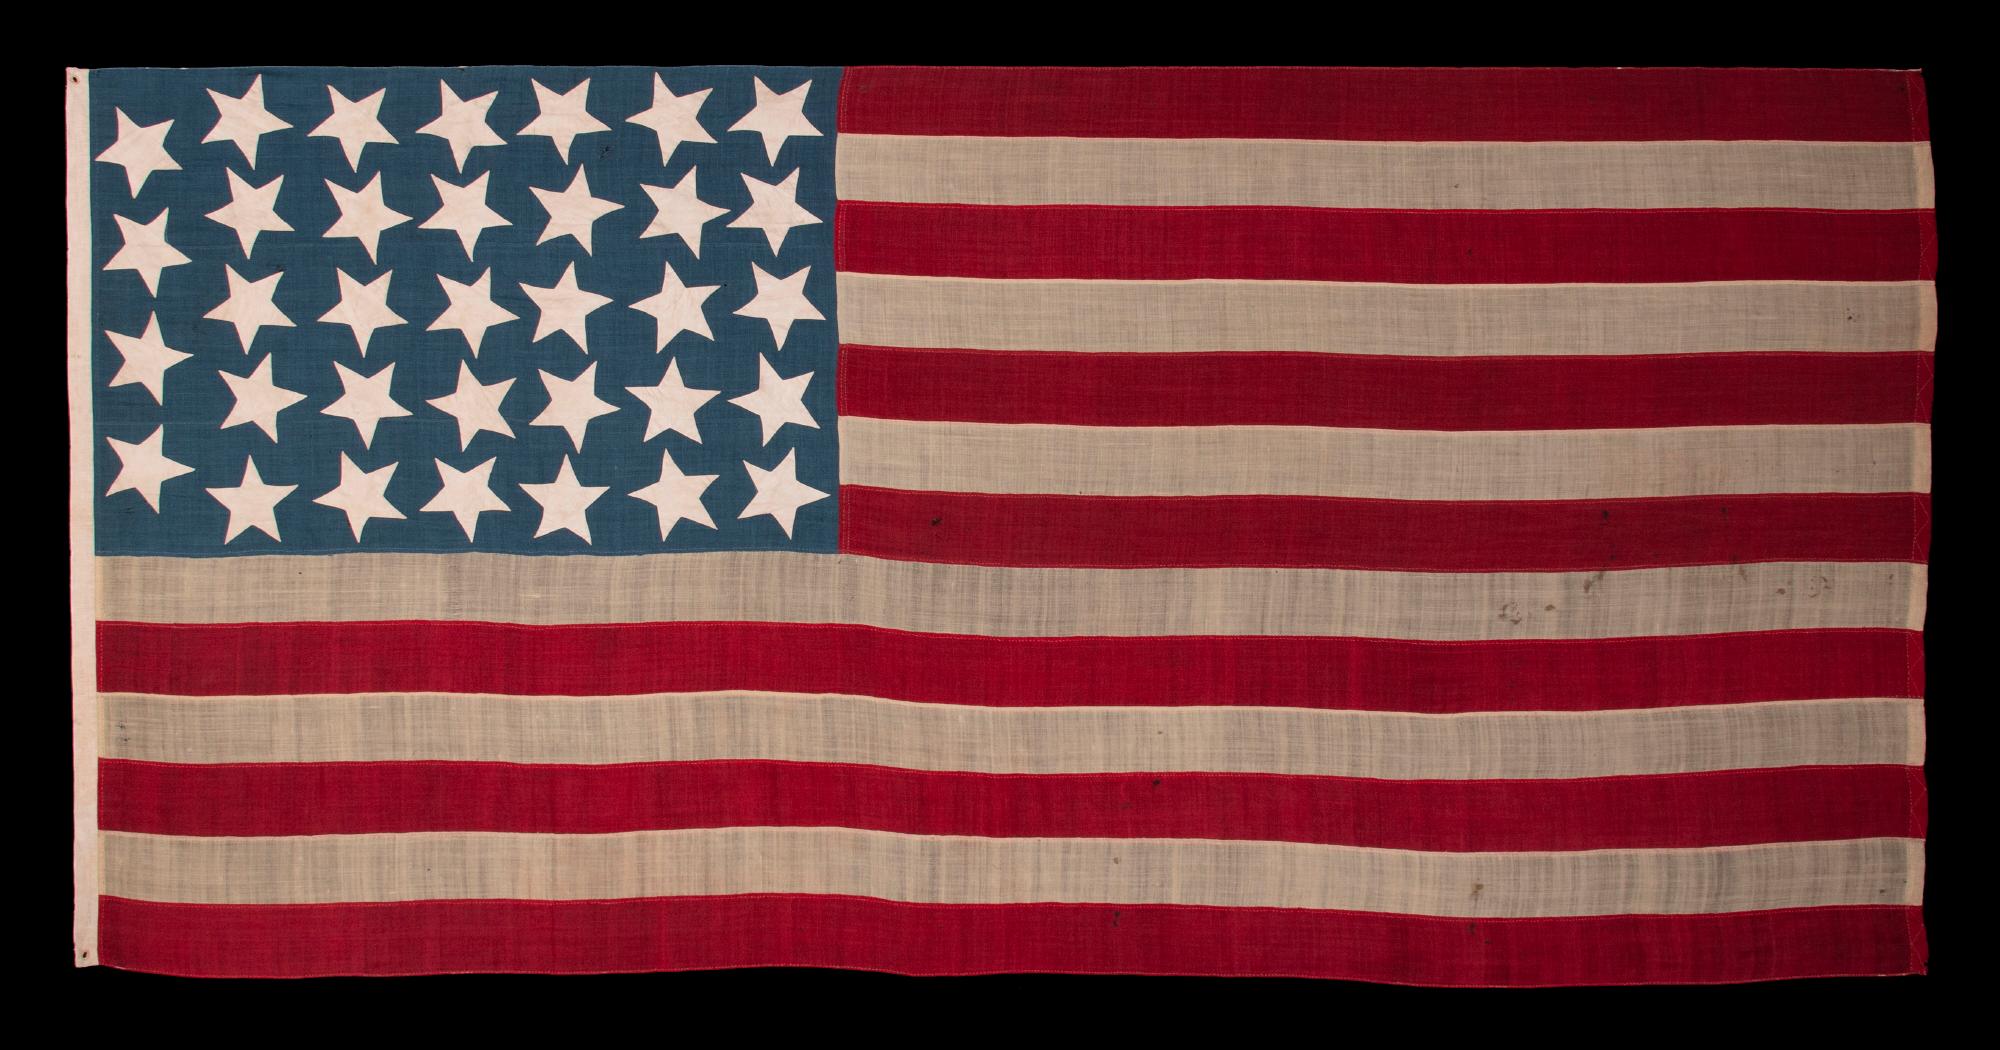 Antique civil war flag with 34 large stars, oriented in all directions, on a rich, steel blue canton, reflects Kansas statehood, 1861-1863

34 star American national flag with a number of visually attractive features. Chief among these are its